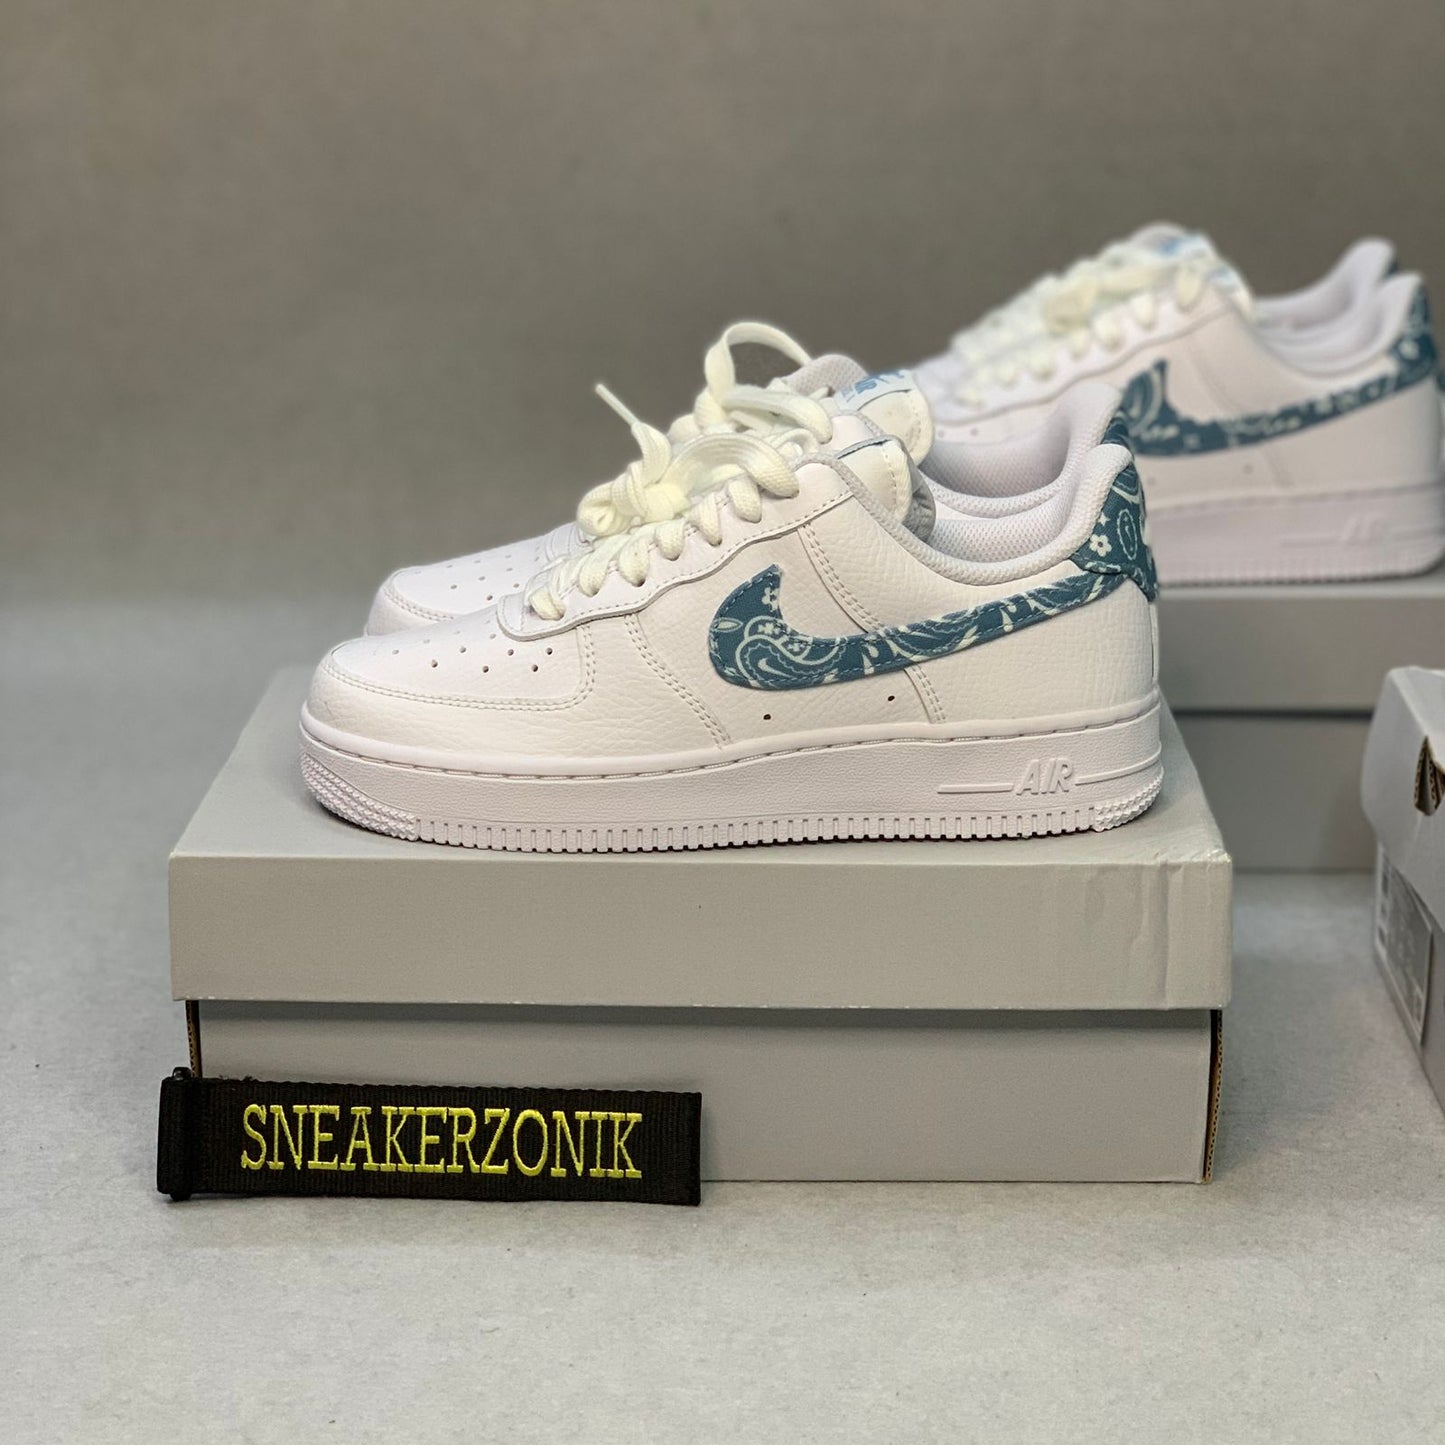 Nike Air Force 1 Low Paisley - Worn Blue Sneakers - White for Women